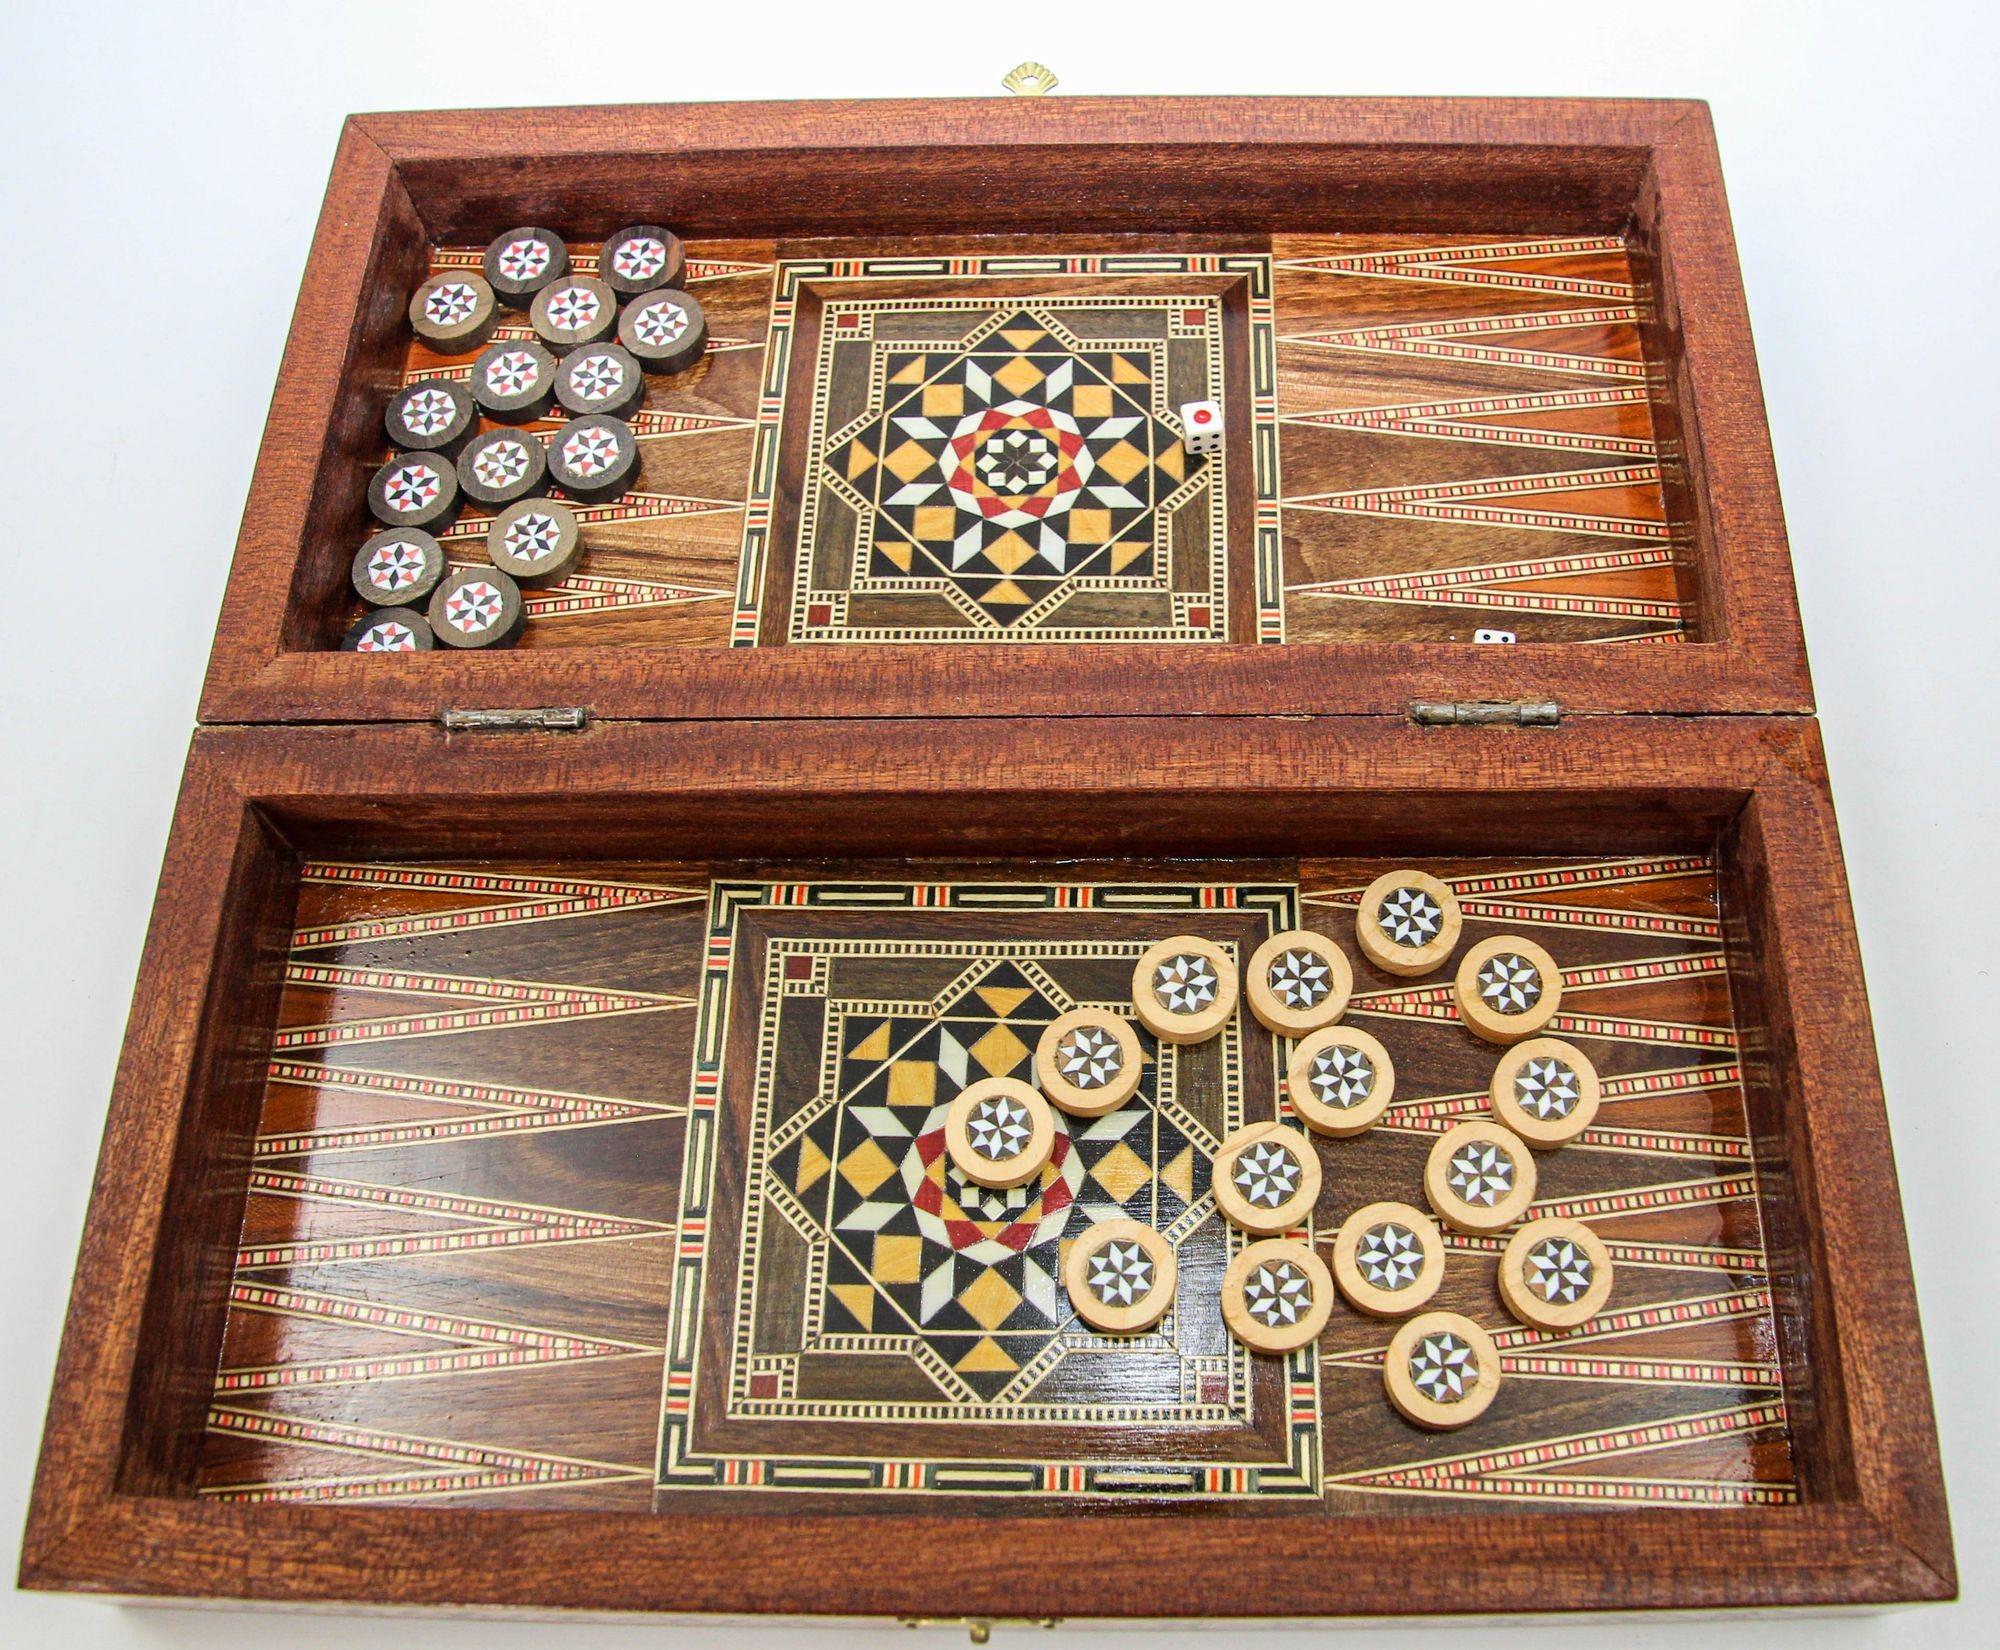 Middle Eastern Micro Mosaic Wooden Inlaid Marquetry Box Game Backgammon.
Large vintage Moorish Syrian style micro mosaic Inlay marquetry mosaic backgammon and chess game box.
Amazing craftsmanship intricate marquetry in mosaic Moorish geometric